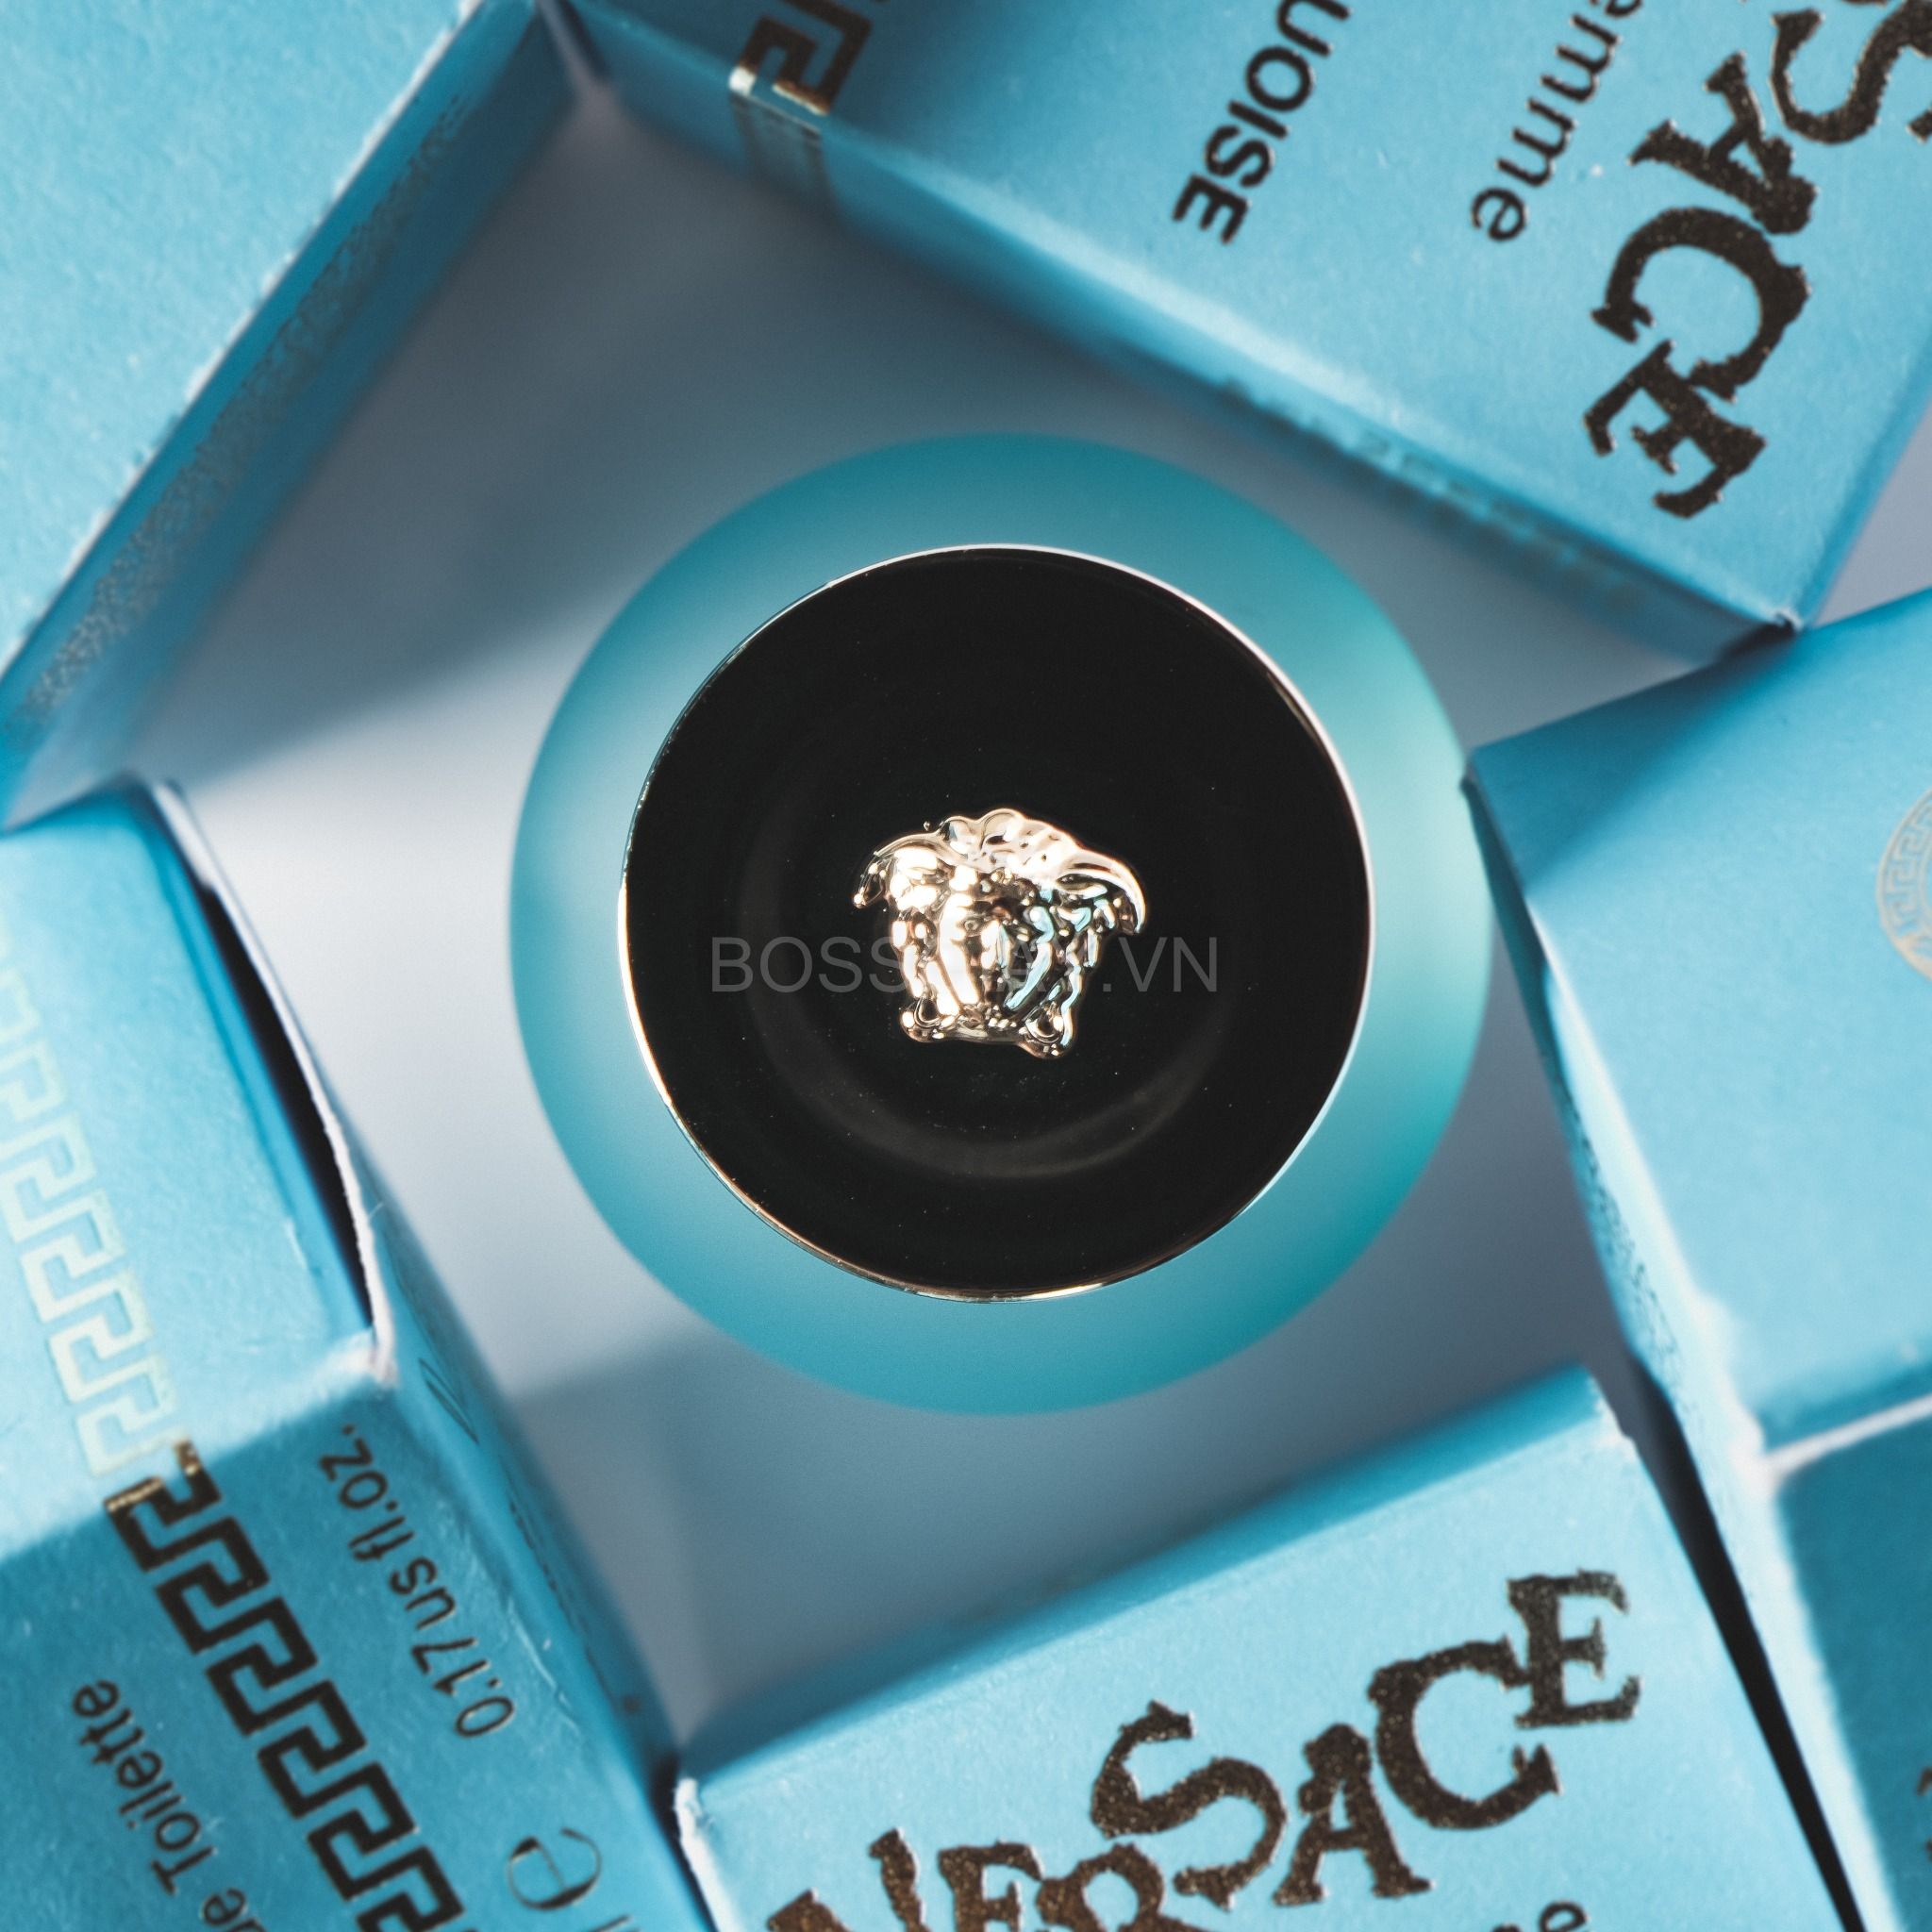  Versace Dylan Turquoise EDT Mini 5ml 